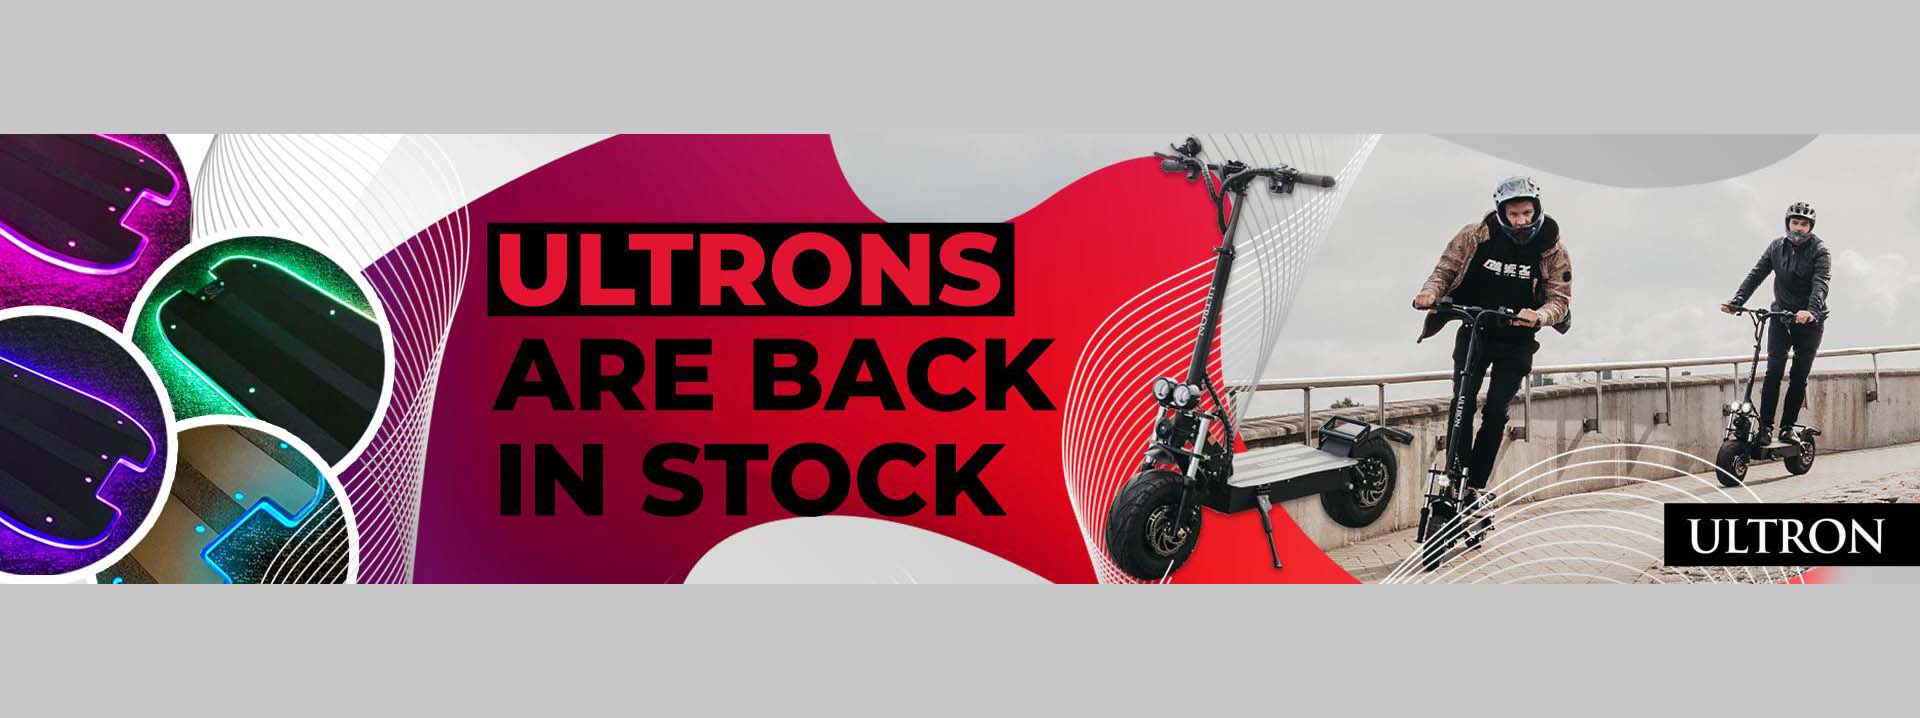 27)ULTRONS ARE BACK IN STOCK